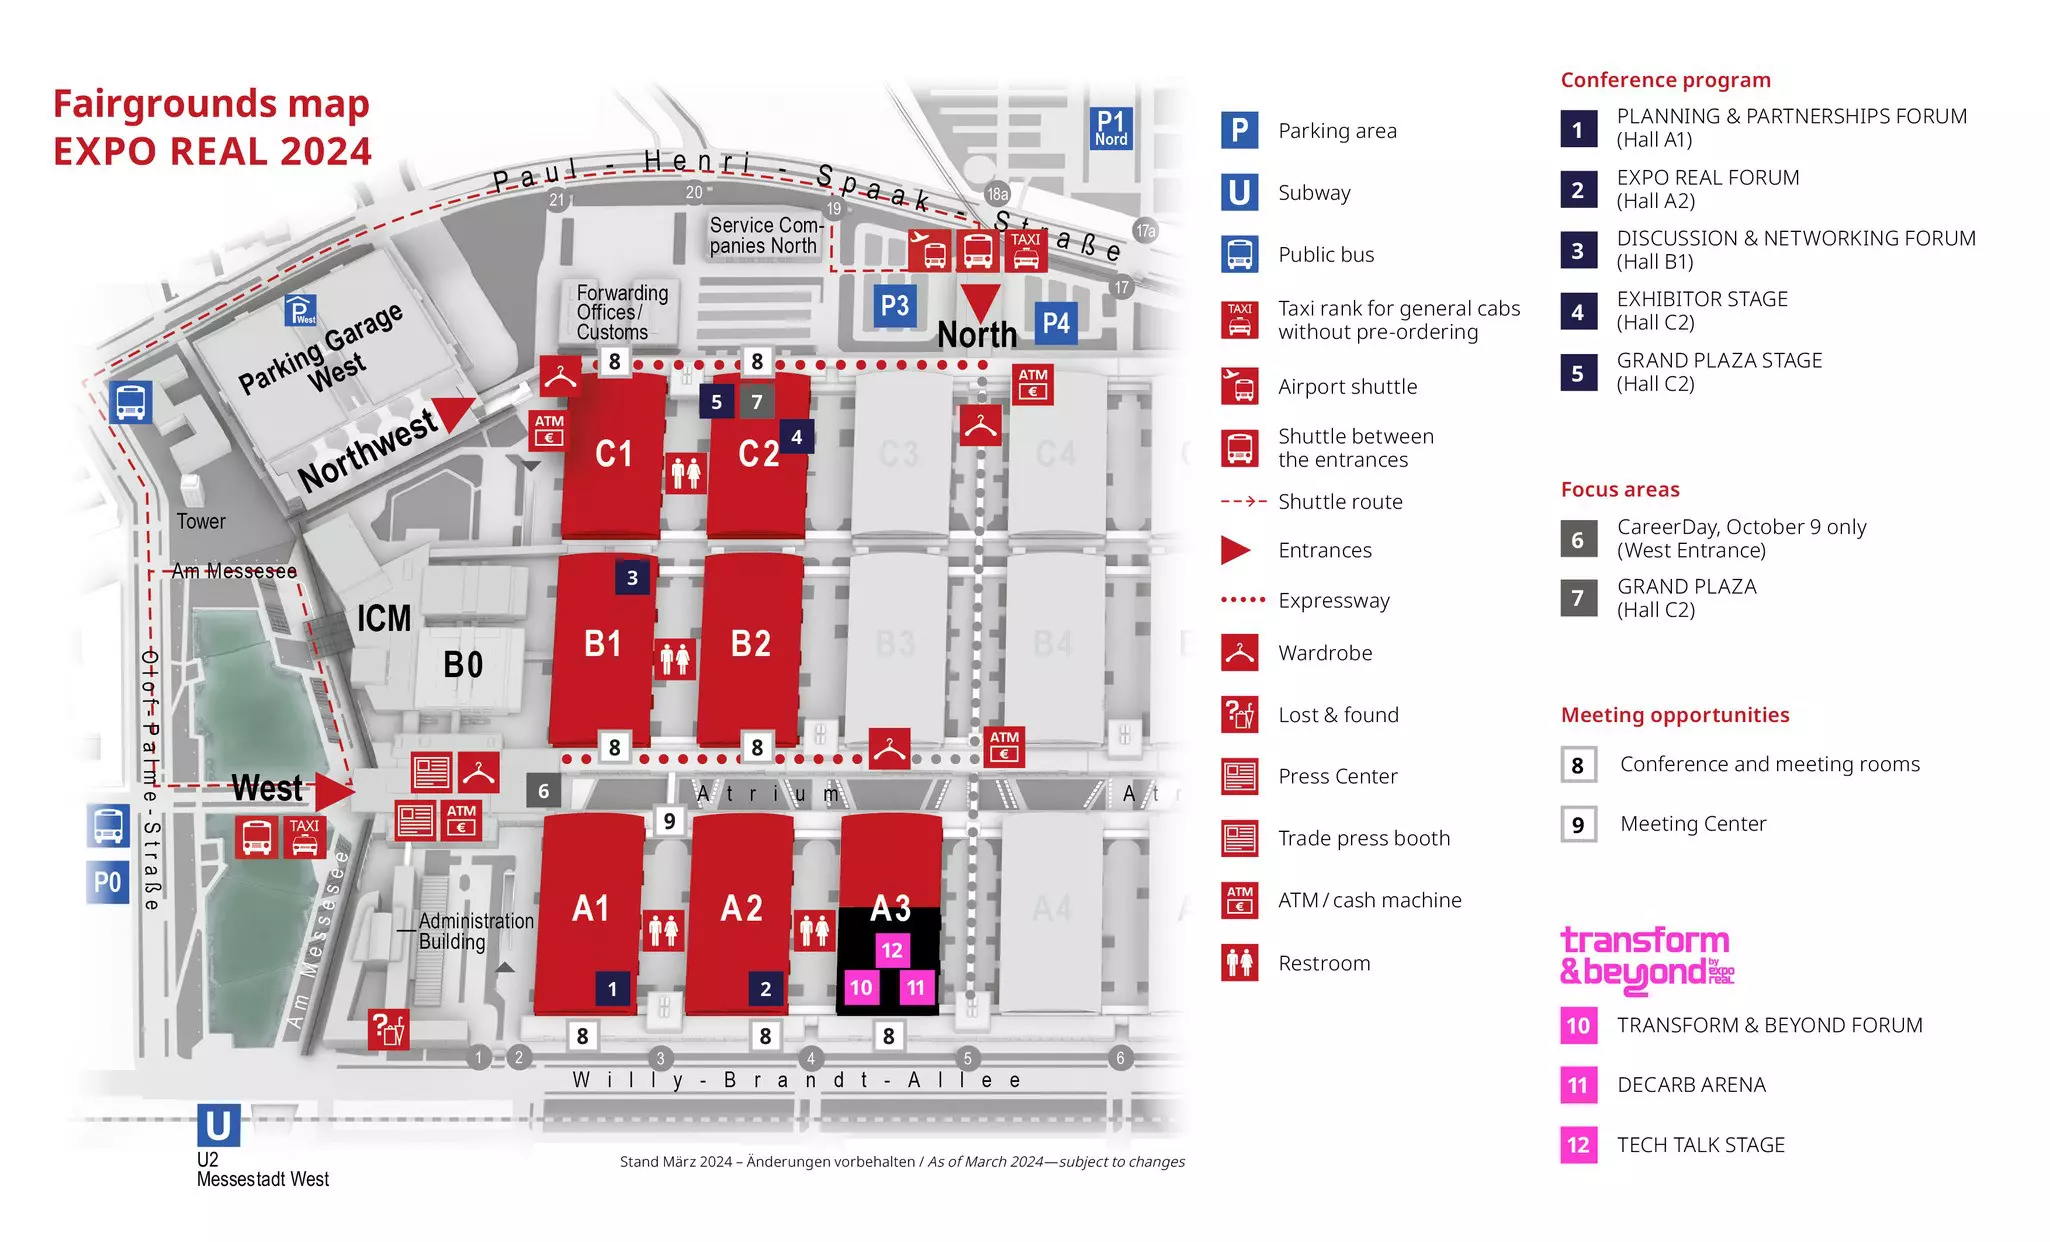 Fairgrounds map of EXPO REAL 2024